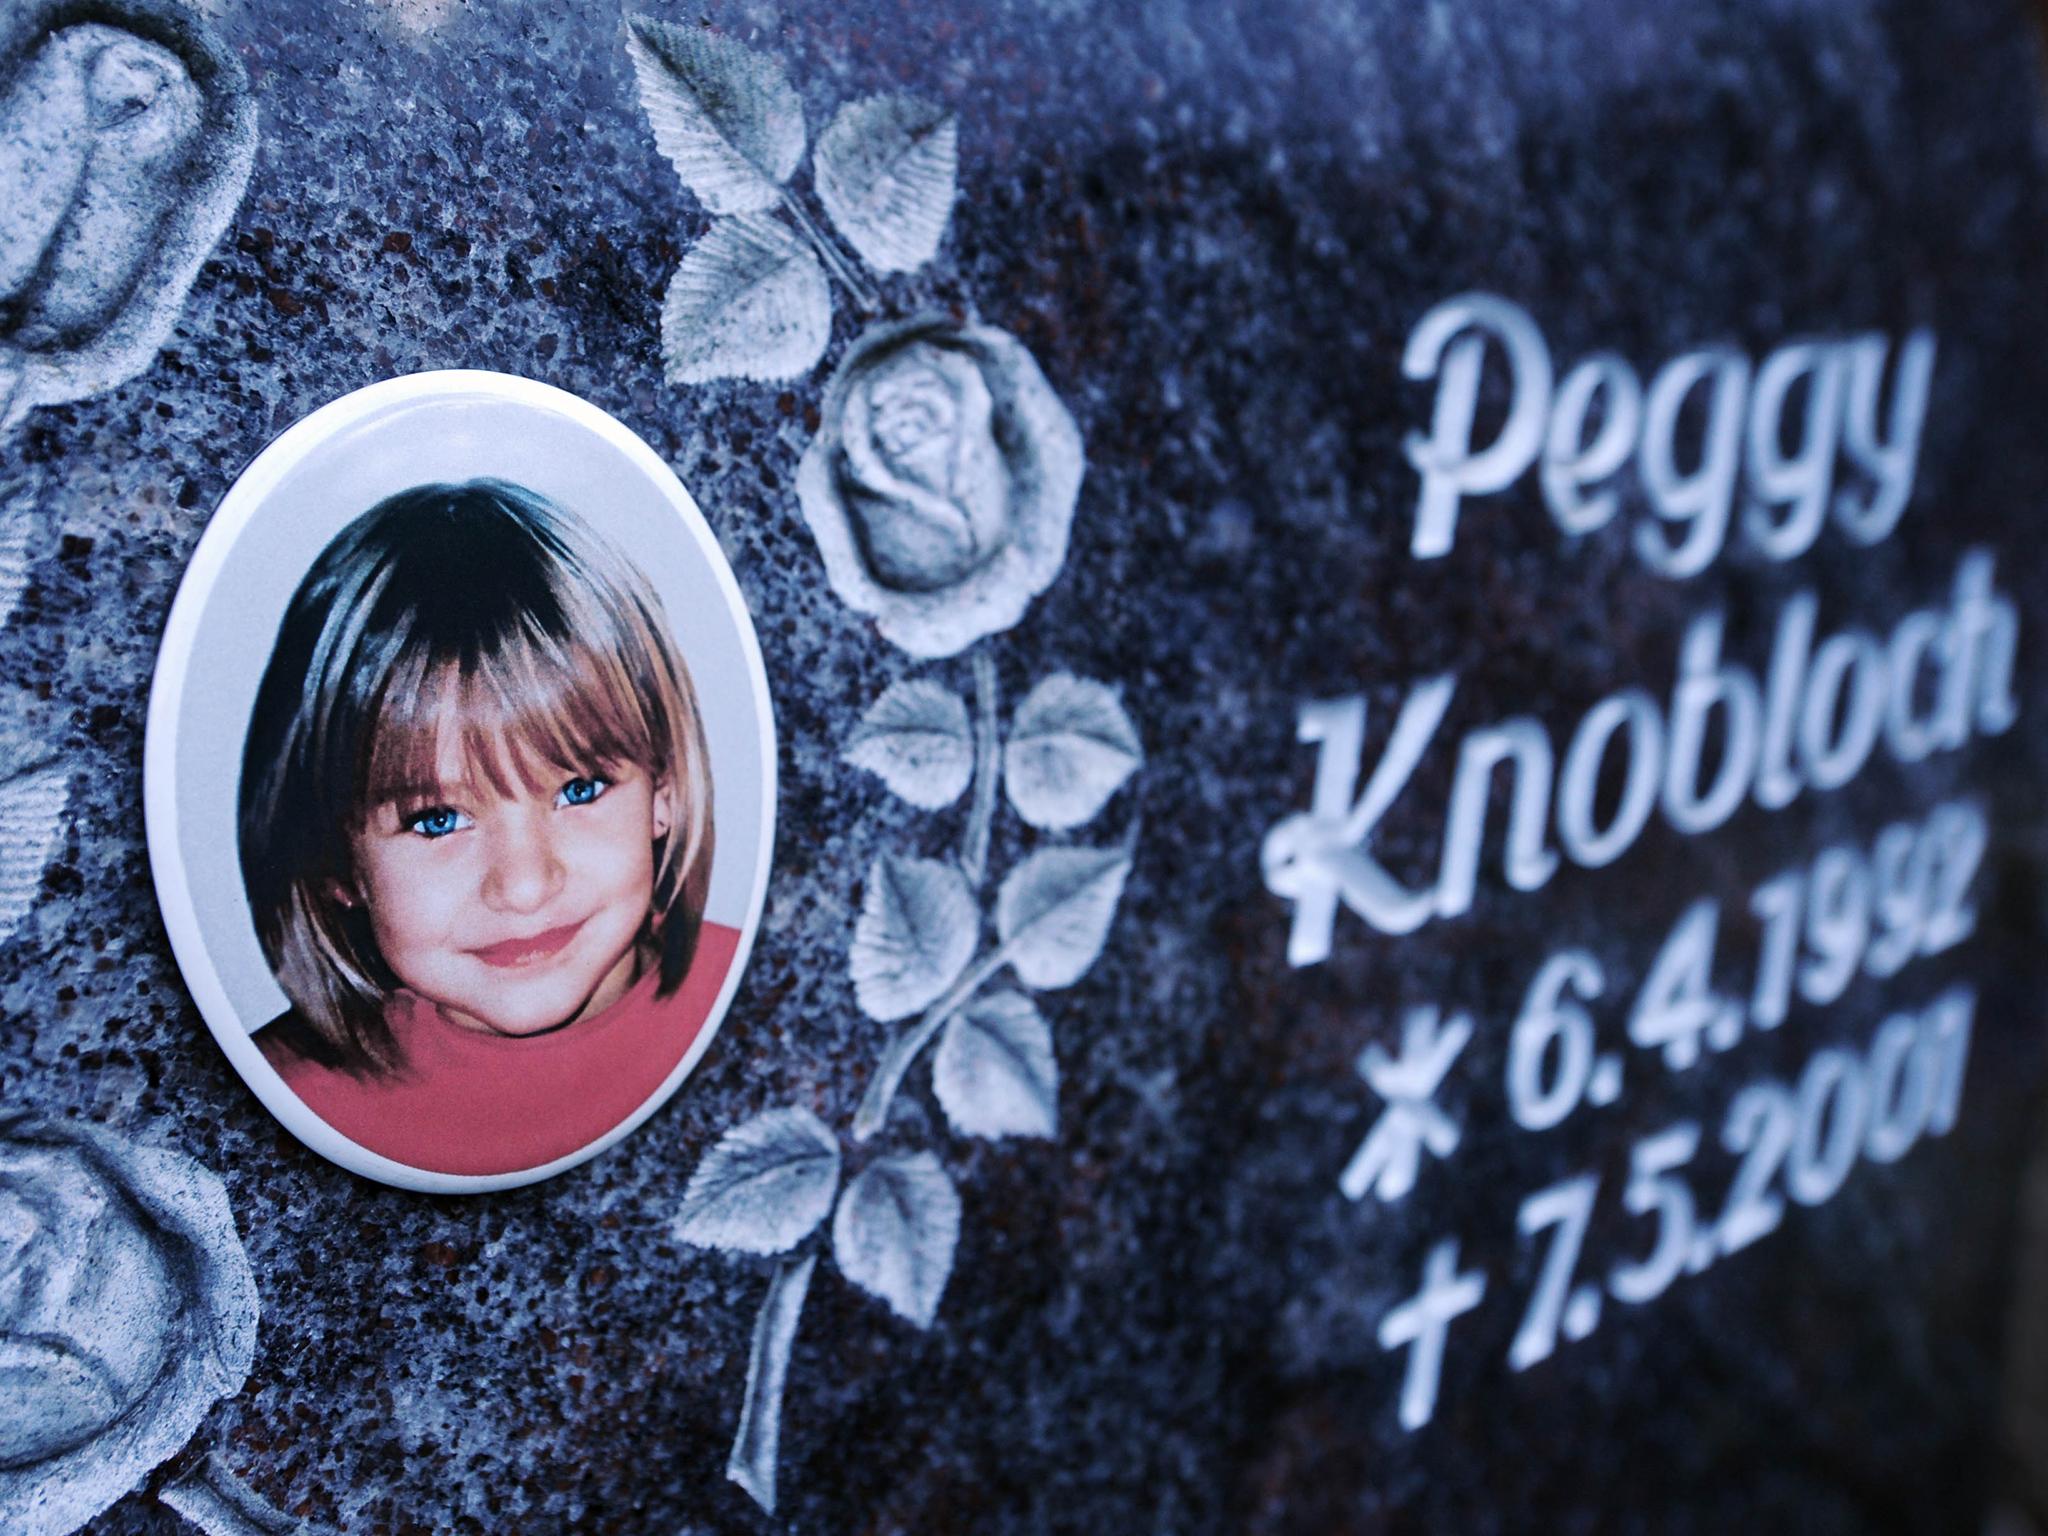 Police in Bavaria confirmed the remains of Peggy Knobloch had been found